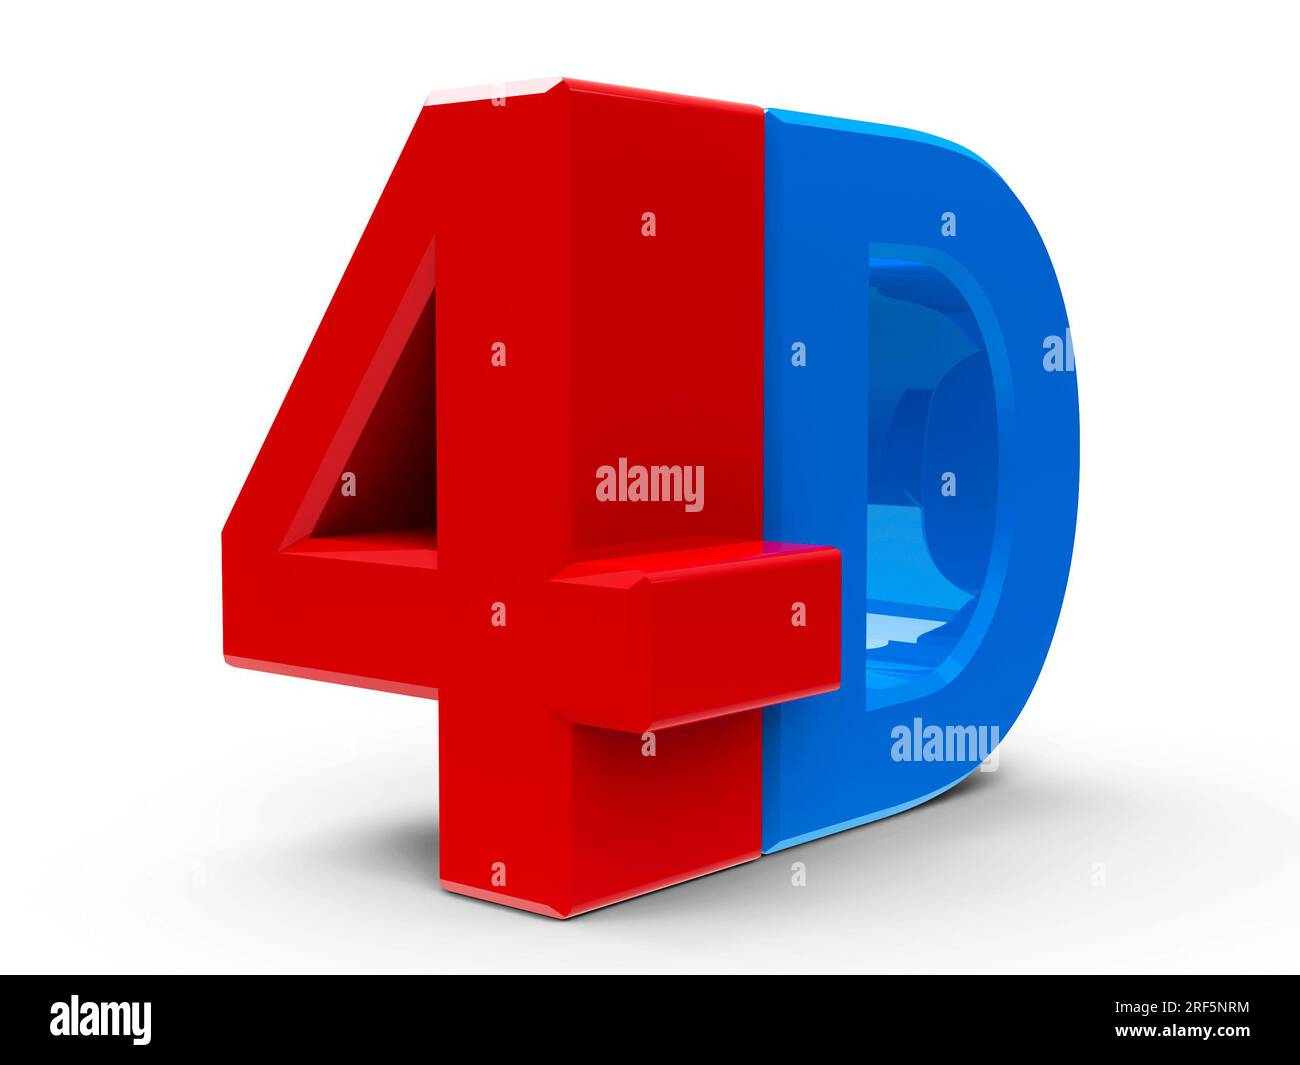 Red and blue 4D text symbol, icon or button isolated on white background, three-dimensional rendering, 3D illustration Stock Photo